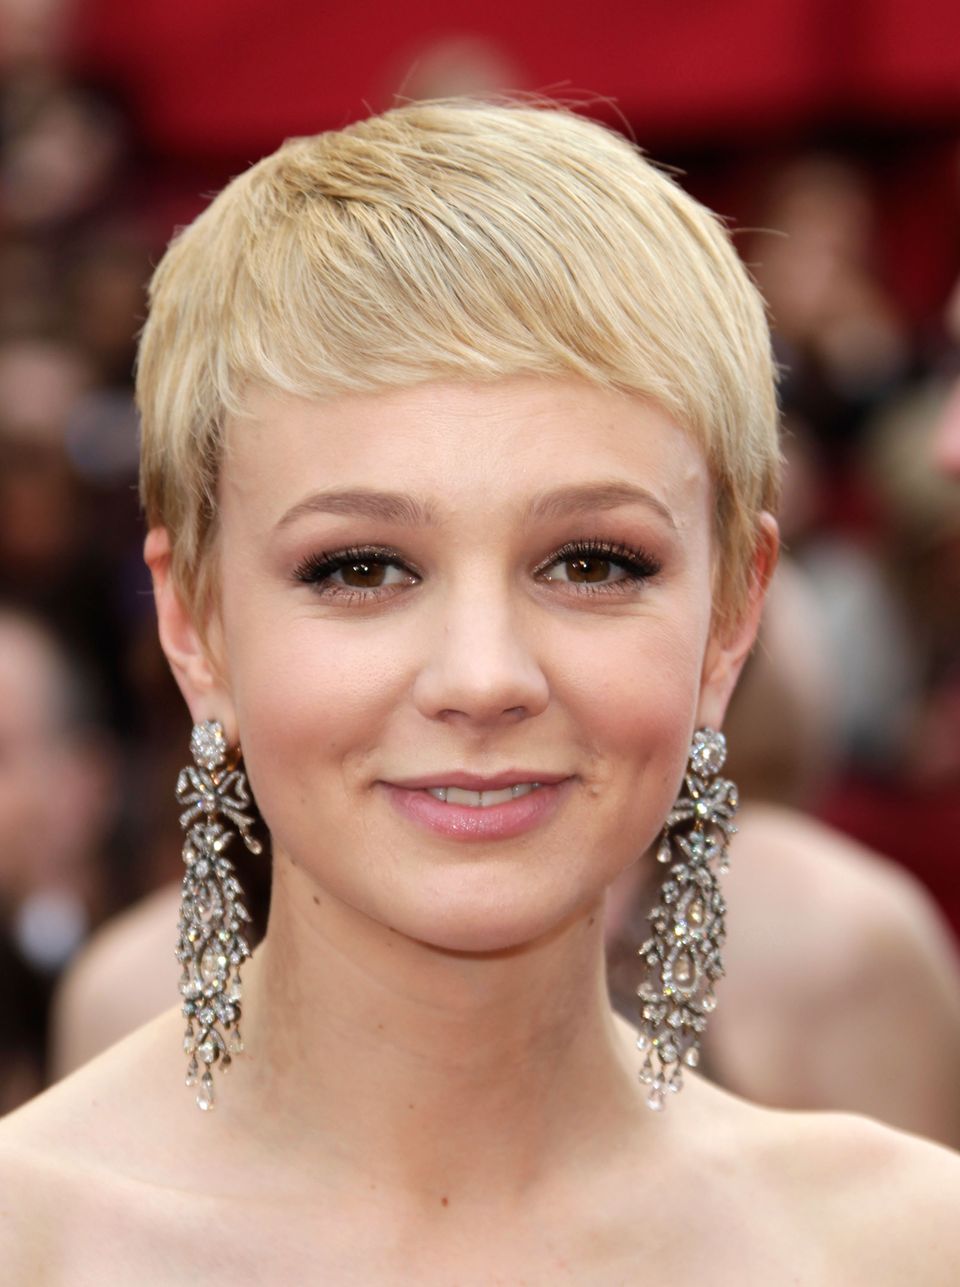 40 Of Carey Mulligan's Most Adorable Hair & Makeup Looks | HuffPost Life